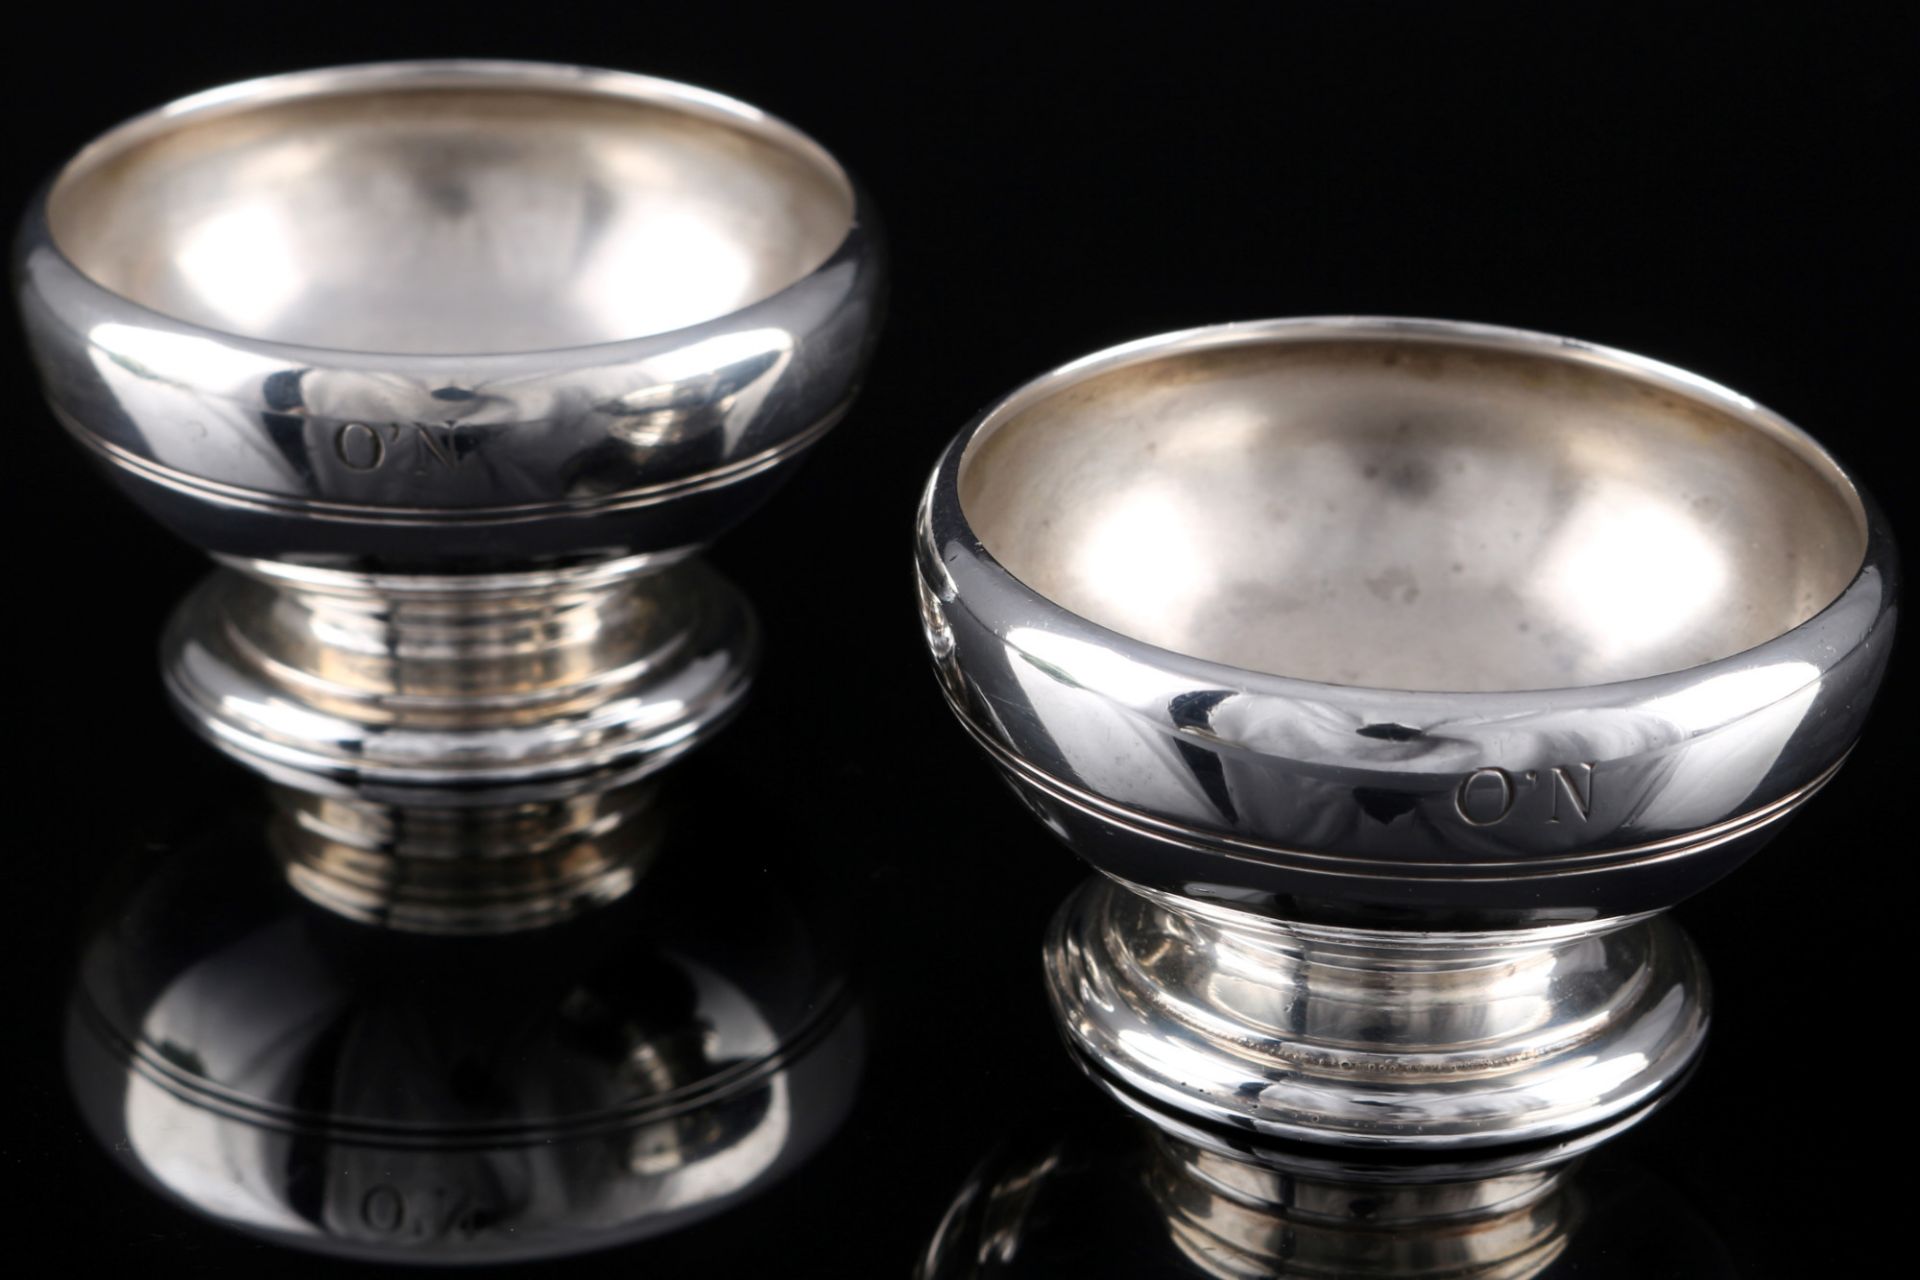 Tiffany & Co. 925 sterling silver pair of bowls 20166, Silber Paar Schalen,